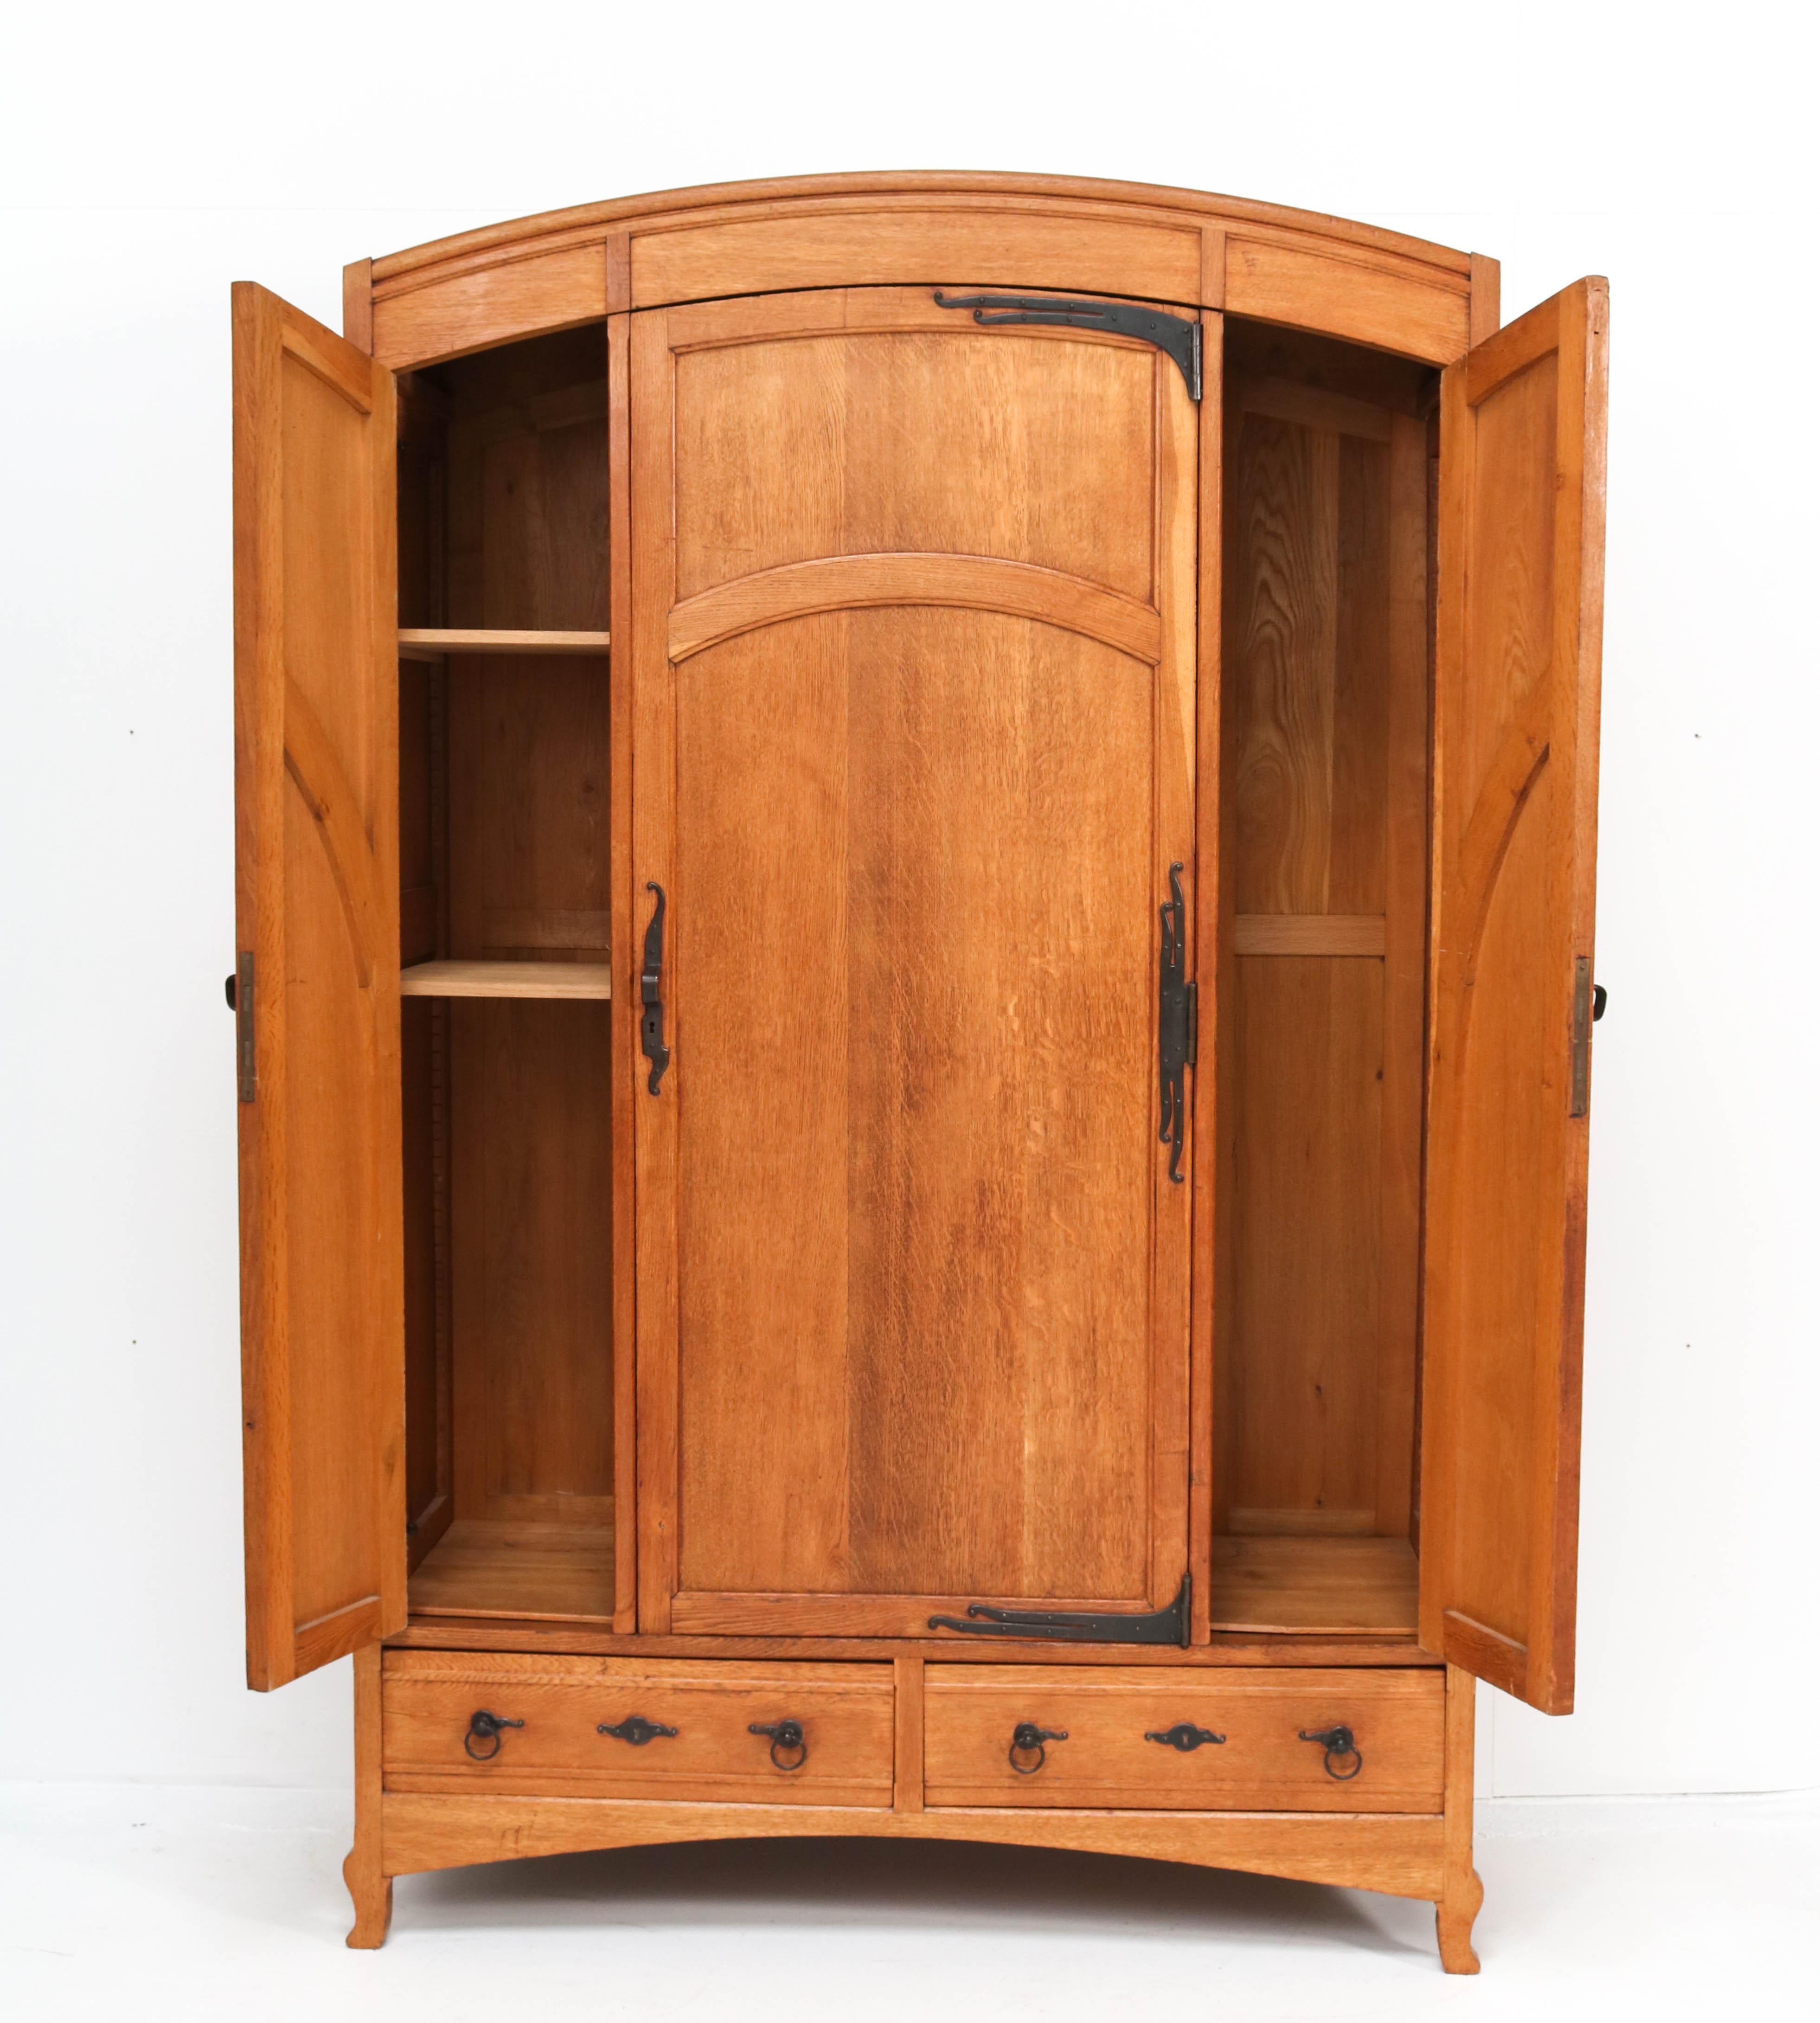 Lacquered Oak Art Nouveau Arts & Crafts Armoire or Wardrobe by Gustave Serrurier-Bovy